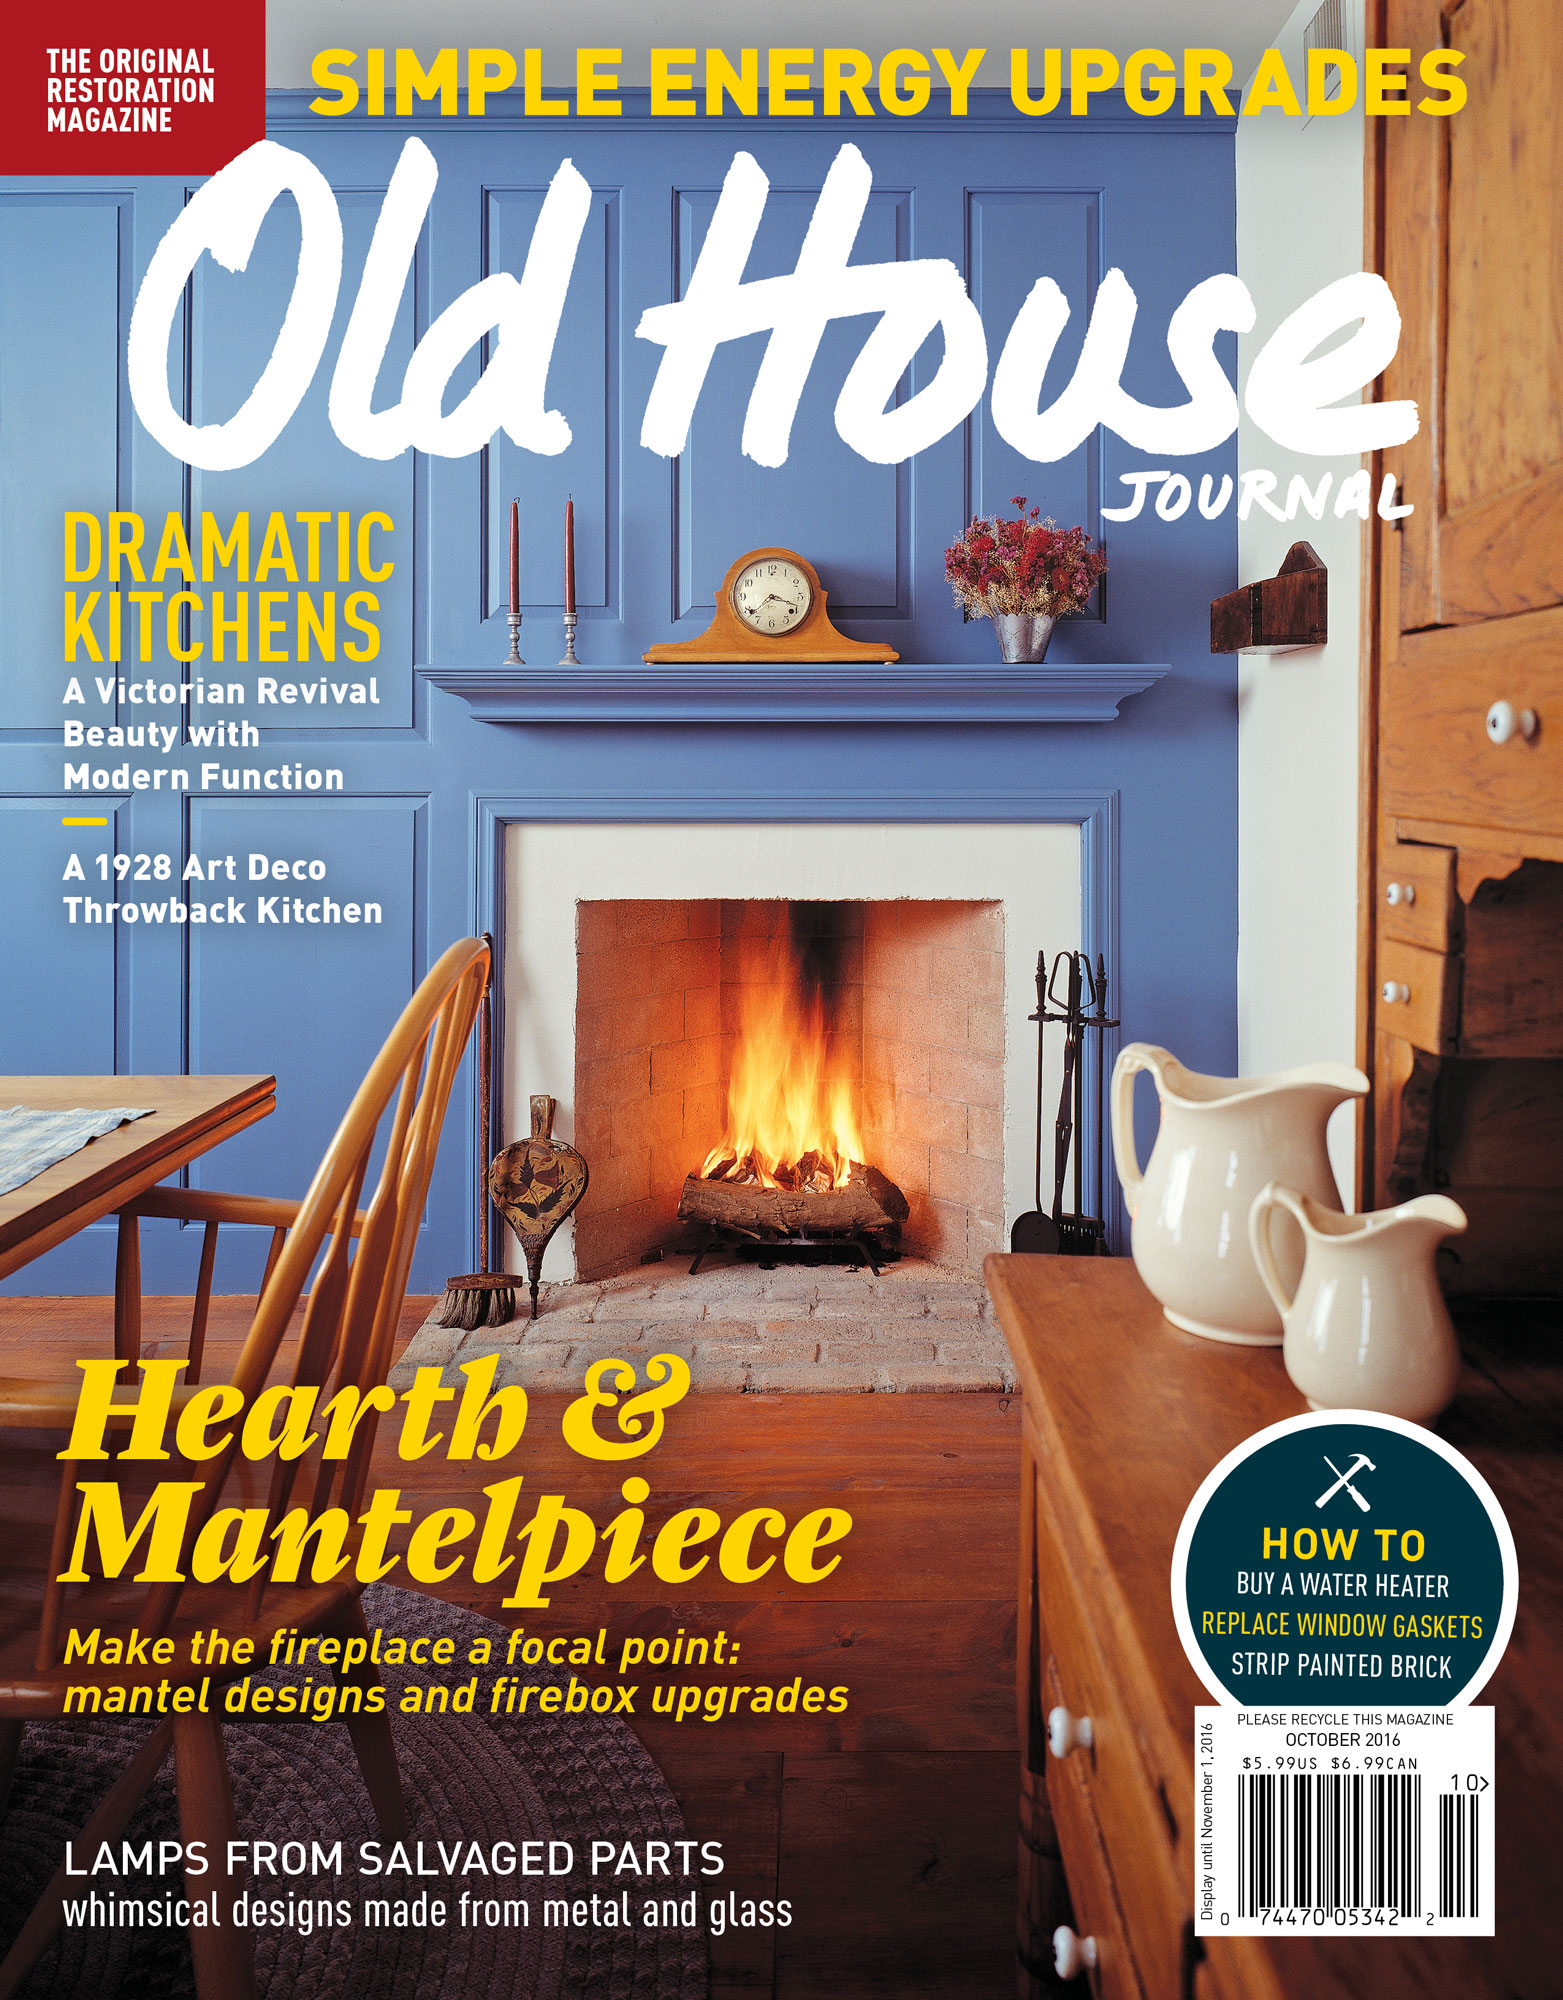 Old House Journal Covers by Megan Hillman